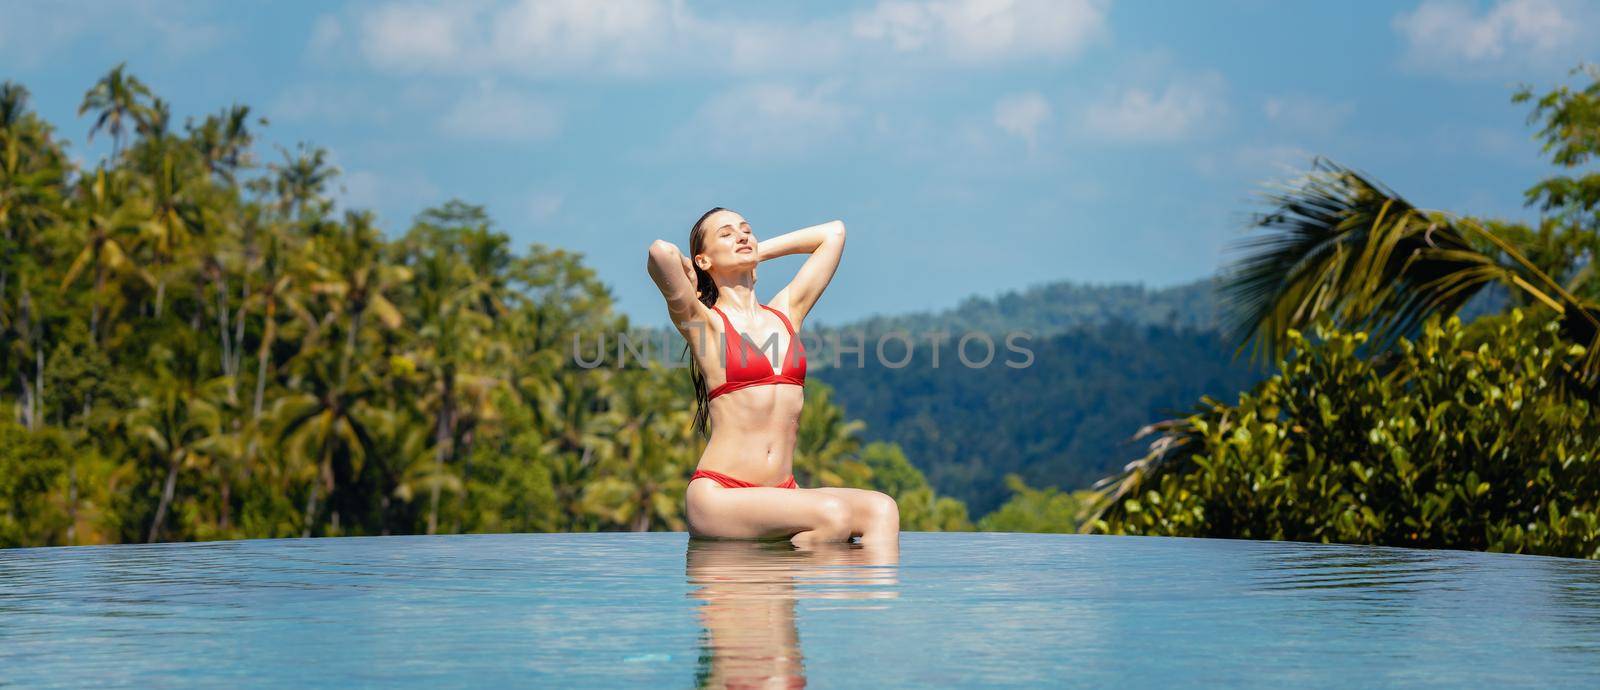 Woman in tropical vacation sitting in the water of pool in front of palm trees